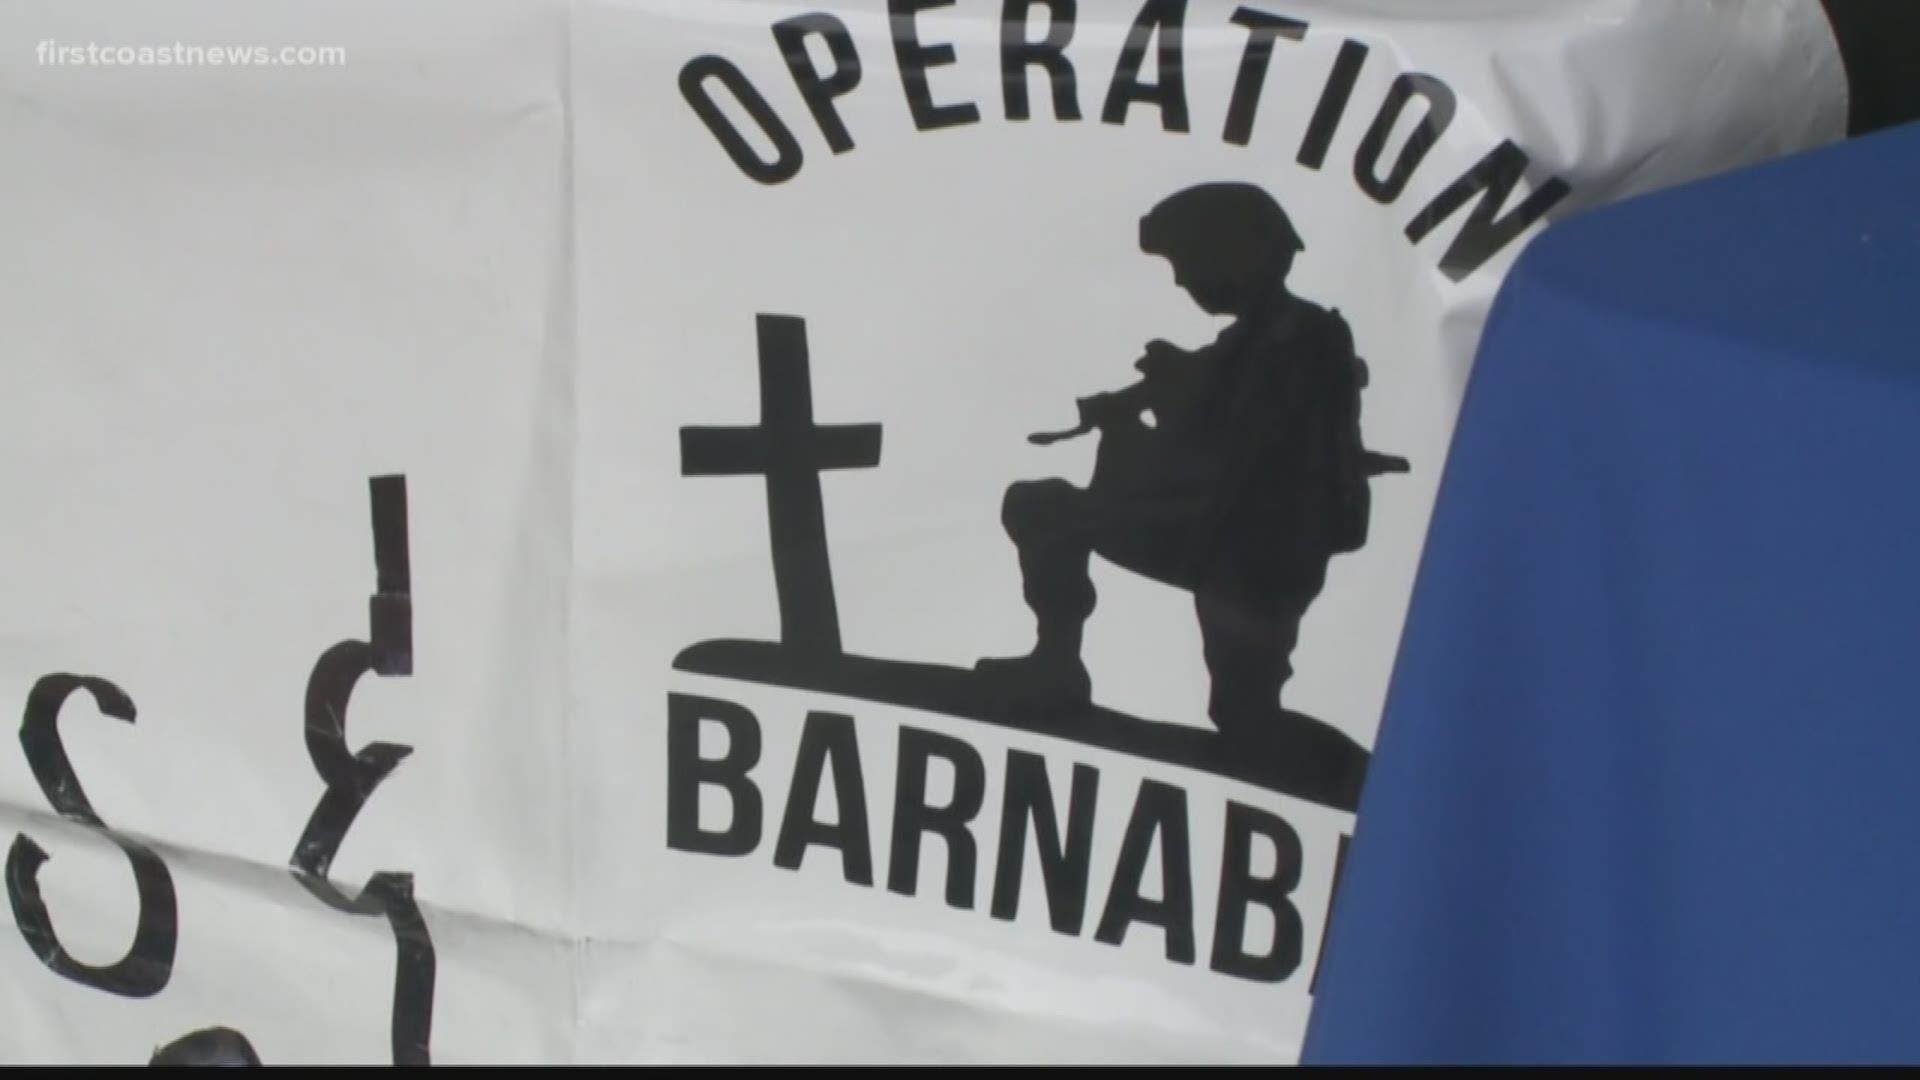 Trey Fagan, a 17-year Marine veteran, founded Operation Barnabas two years ago, with the goal of helping veterans and first responders get back on their feet.